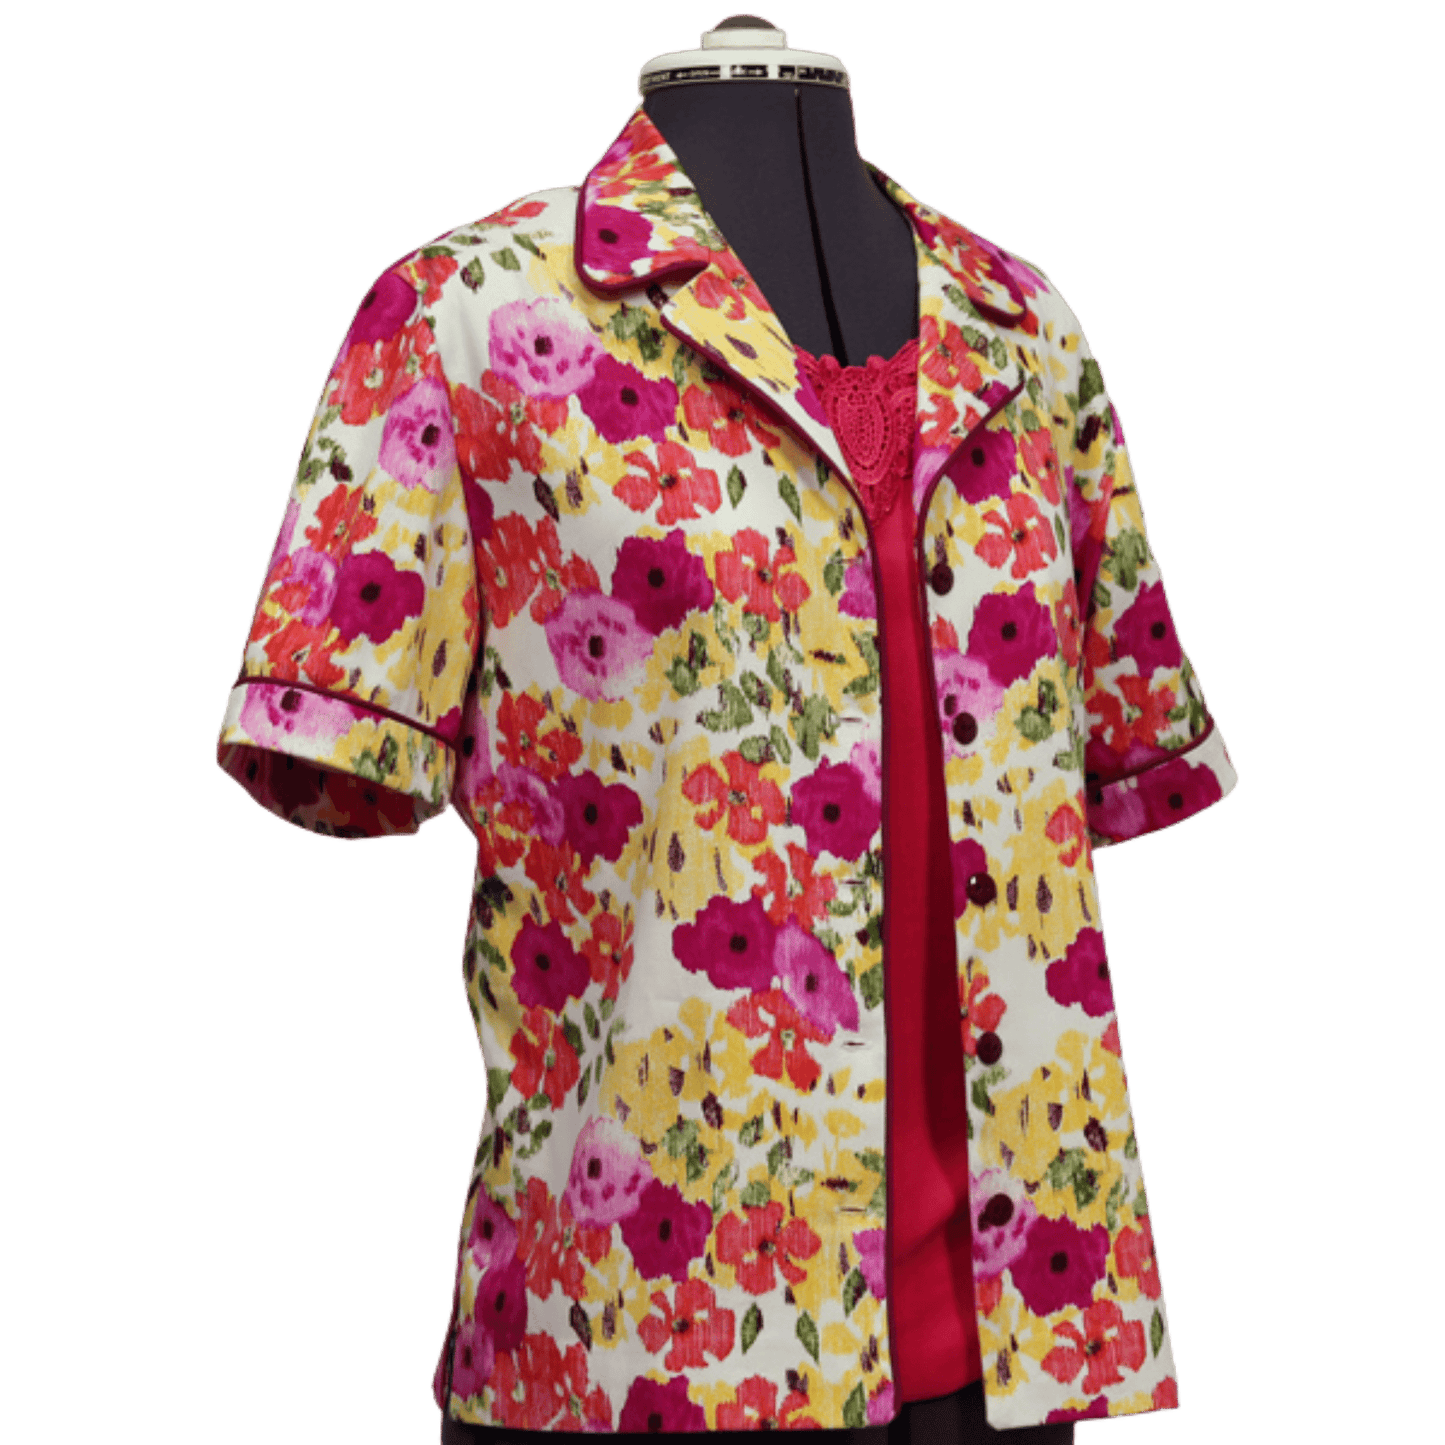 A colorful button up shirt of yellow, fuscia, orange, pink flowers on a white background 